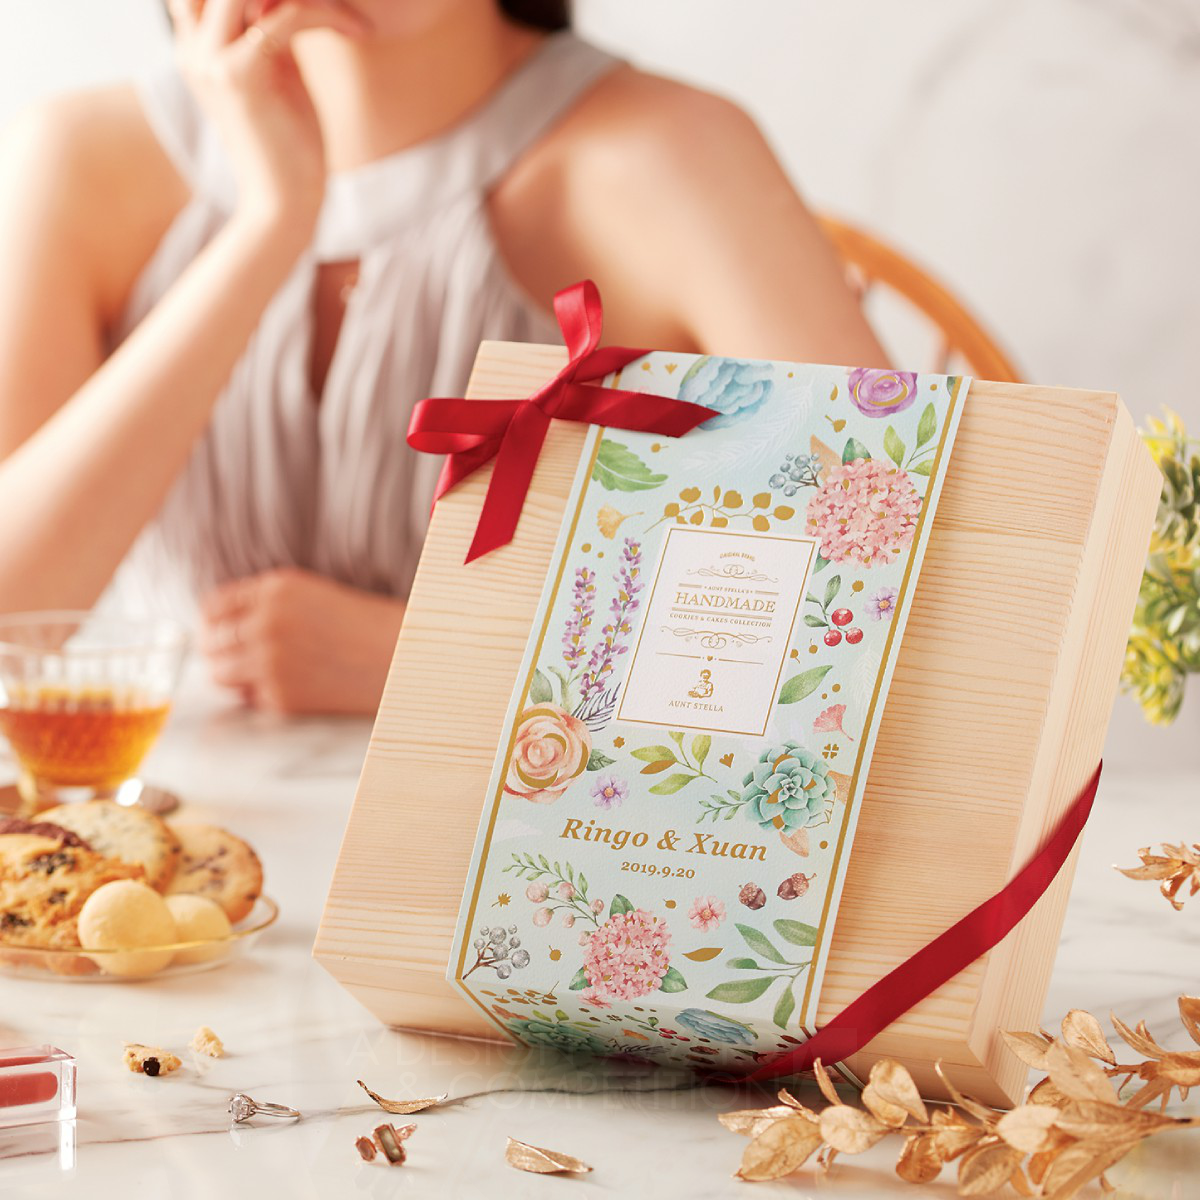 Floral Banquet Wedding Gift Box by SU WAN LING